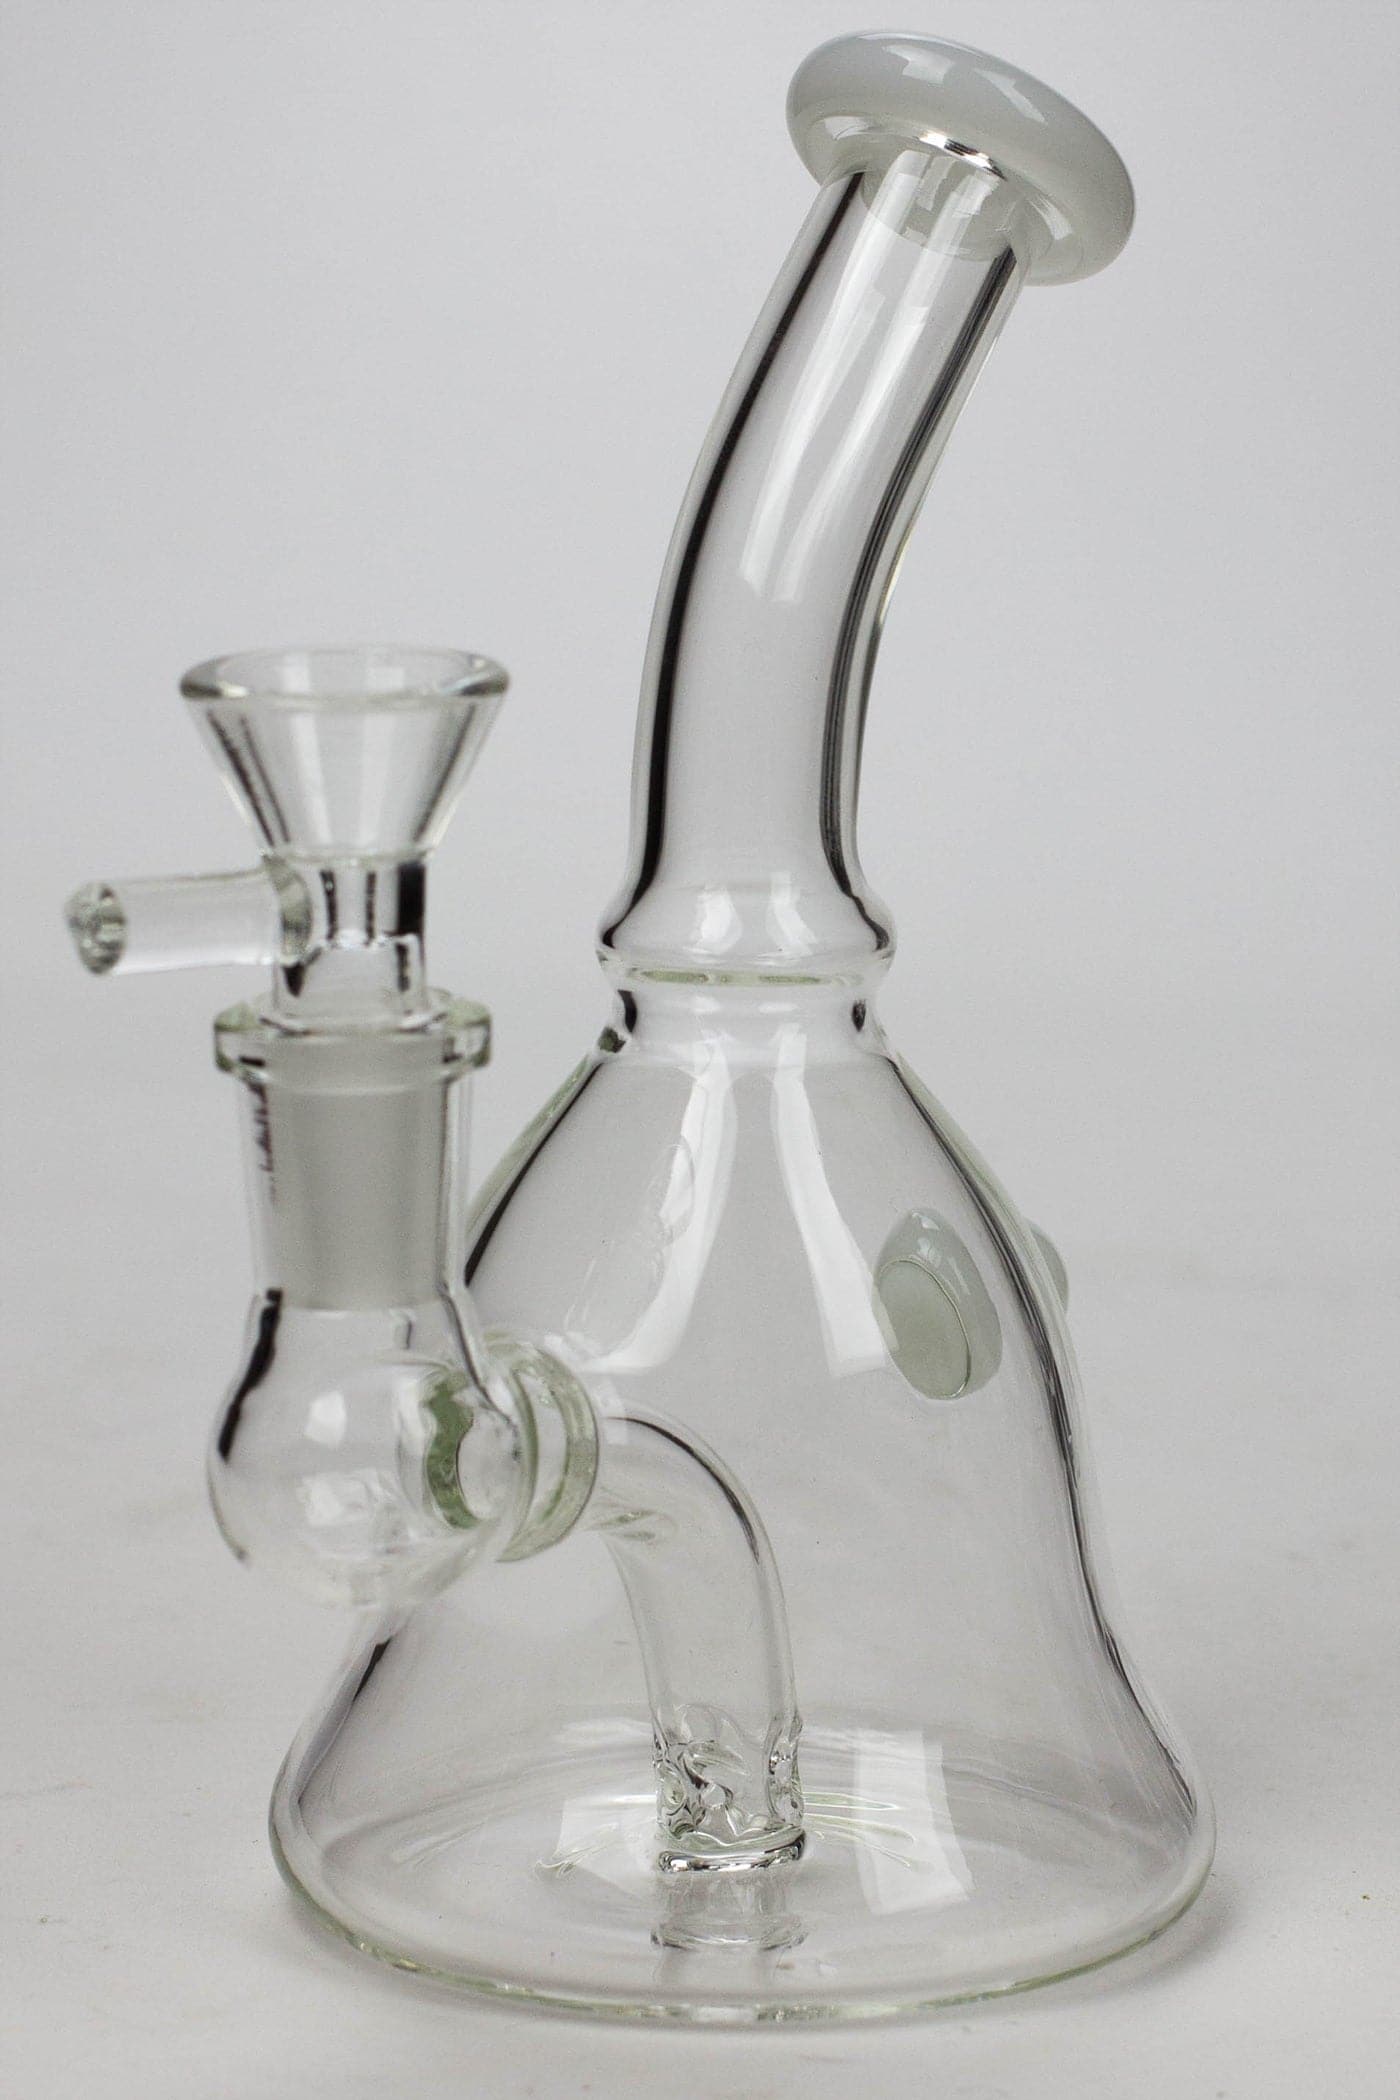 Fixed 3 hole diffuser bell bubbler_3